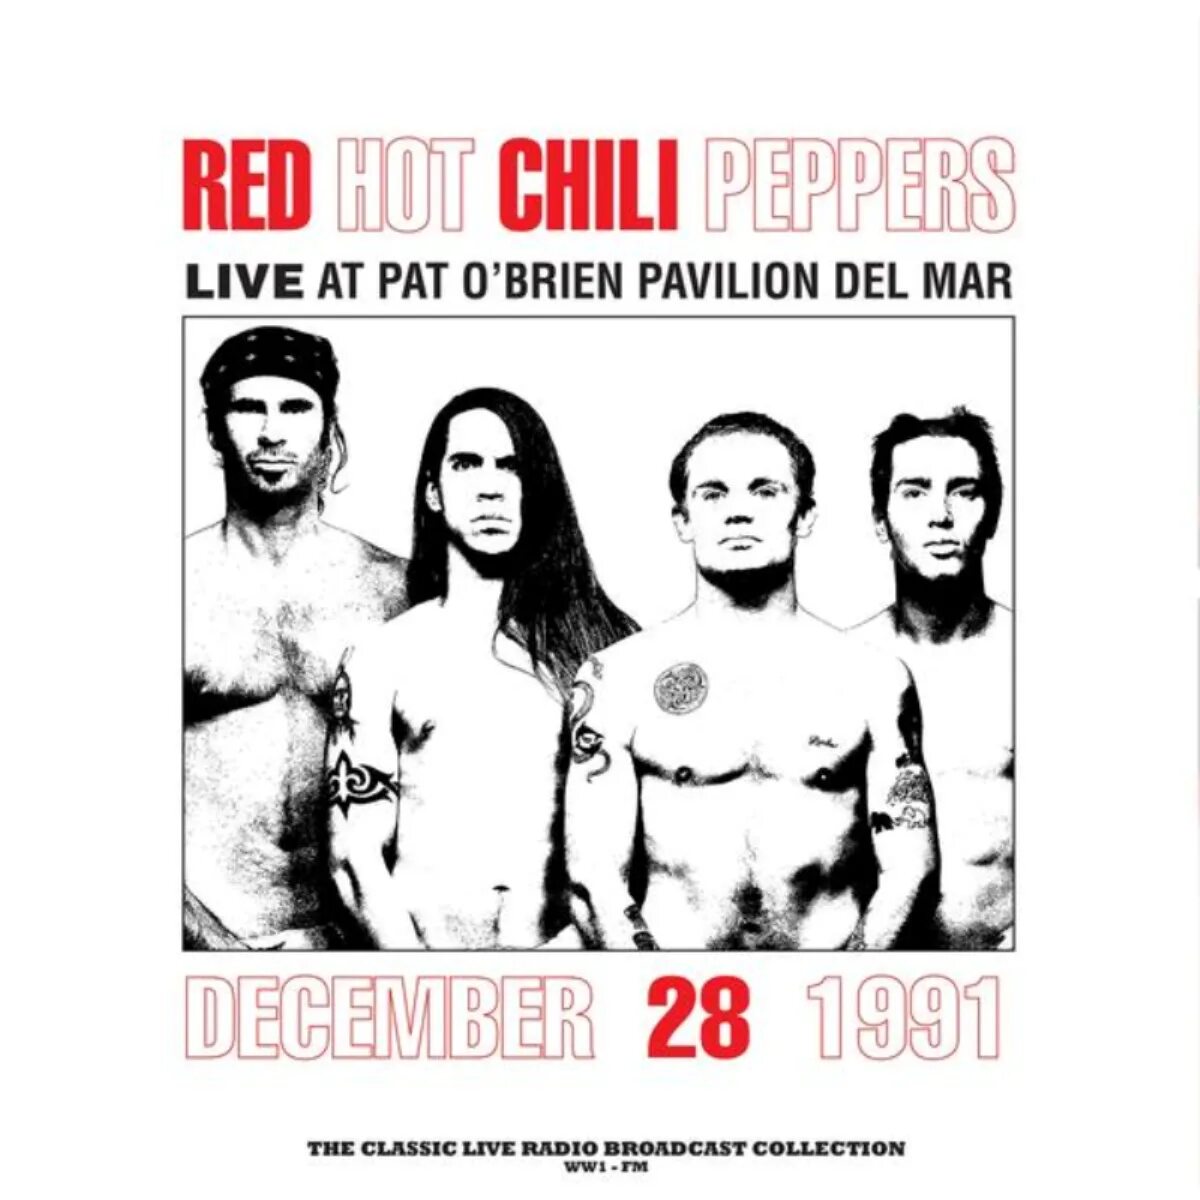 Red hot Chili Peppers пластинка. Пластинки RHCP. Red hot Chili Peppers Live. Red hot Chili Peppers LP. Pat live